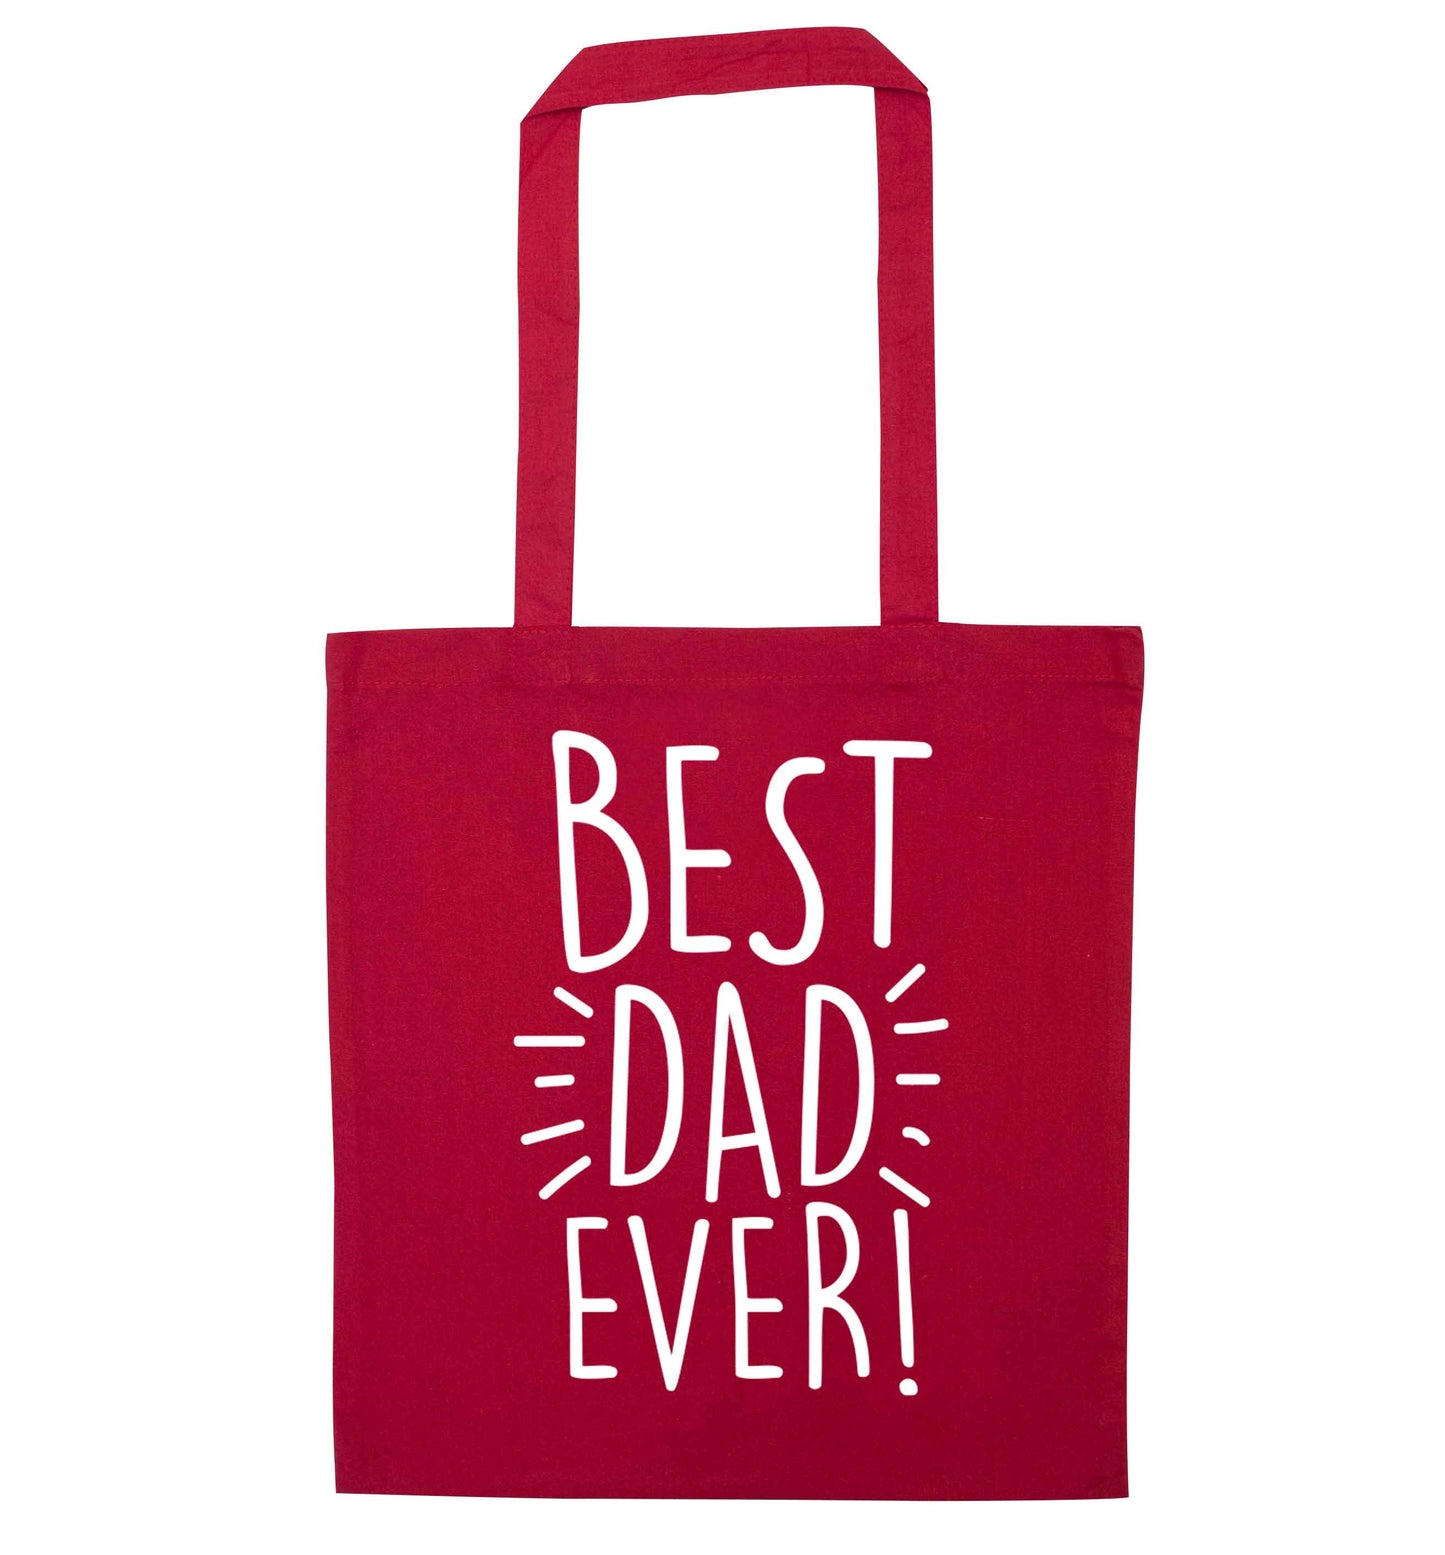 Best dad ever! red tote bag